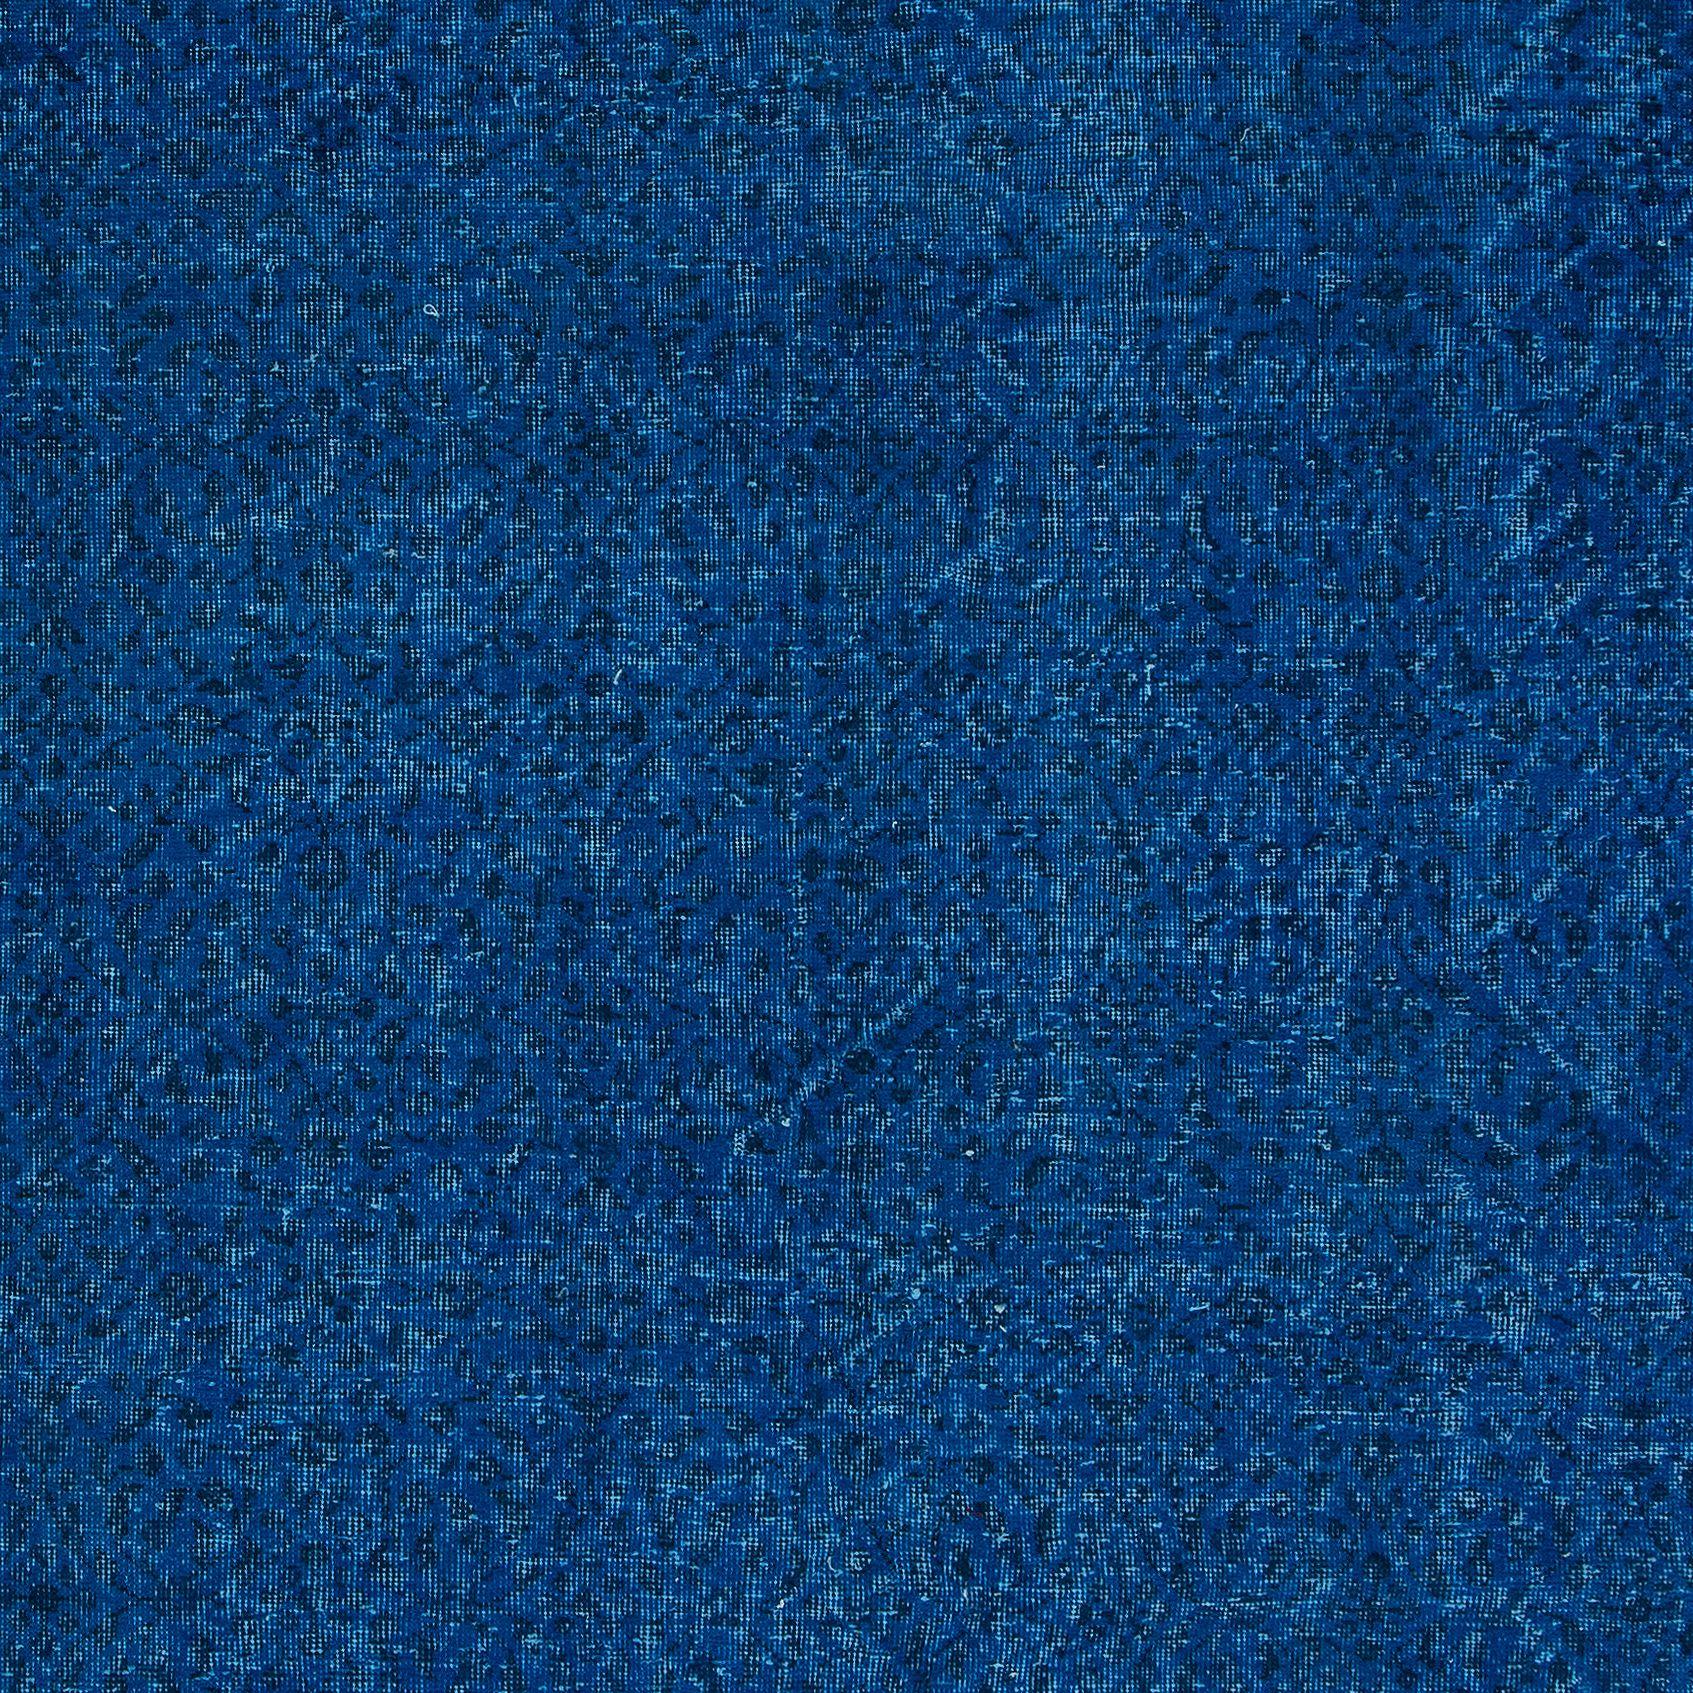 Turkish 7x10 Ft Modern Blue Area Rug made of wool and cotton, Hand-Knotted in Turkey For Sale